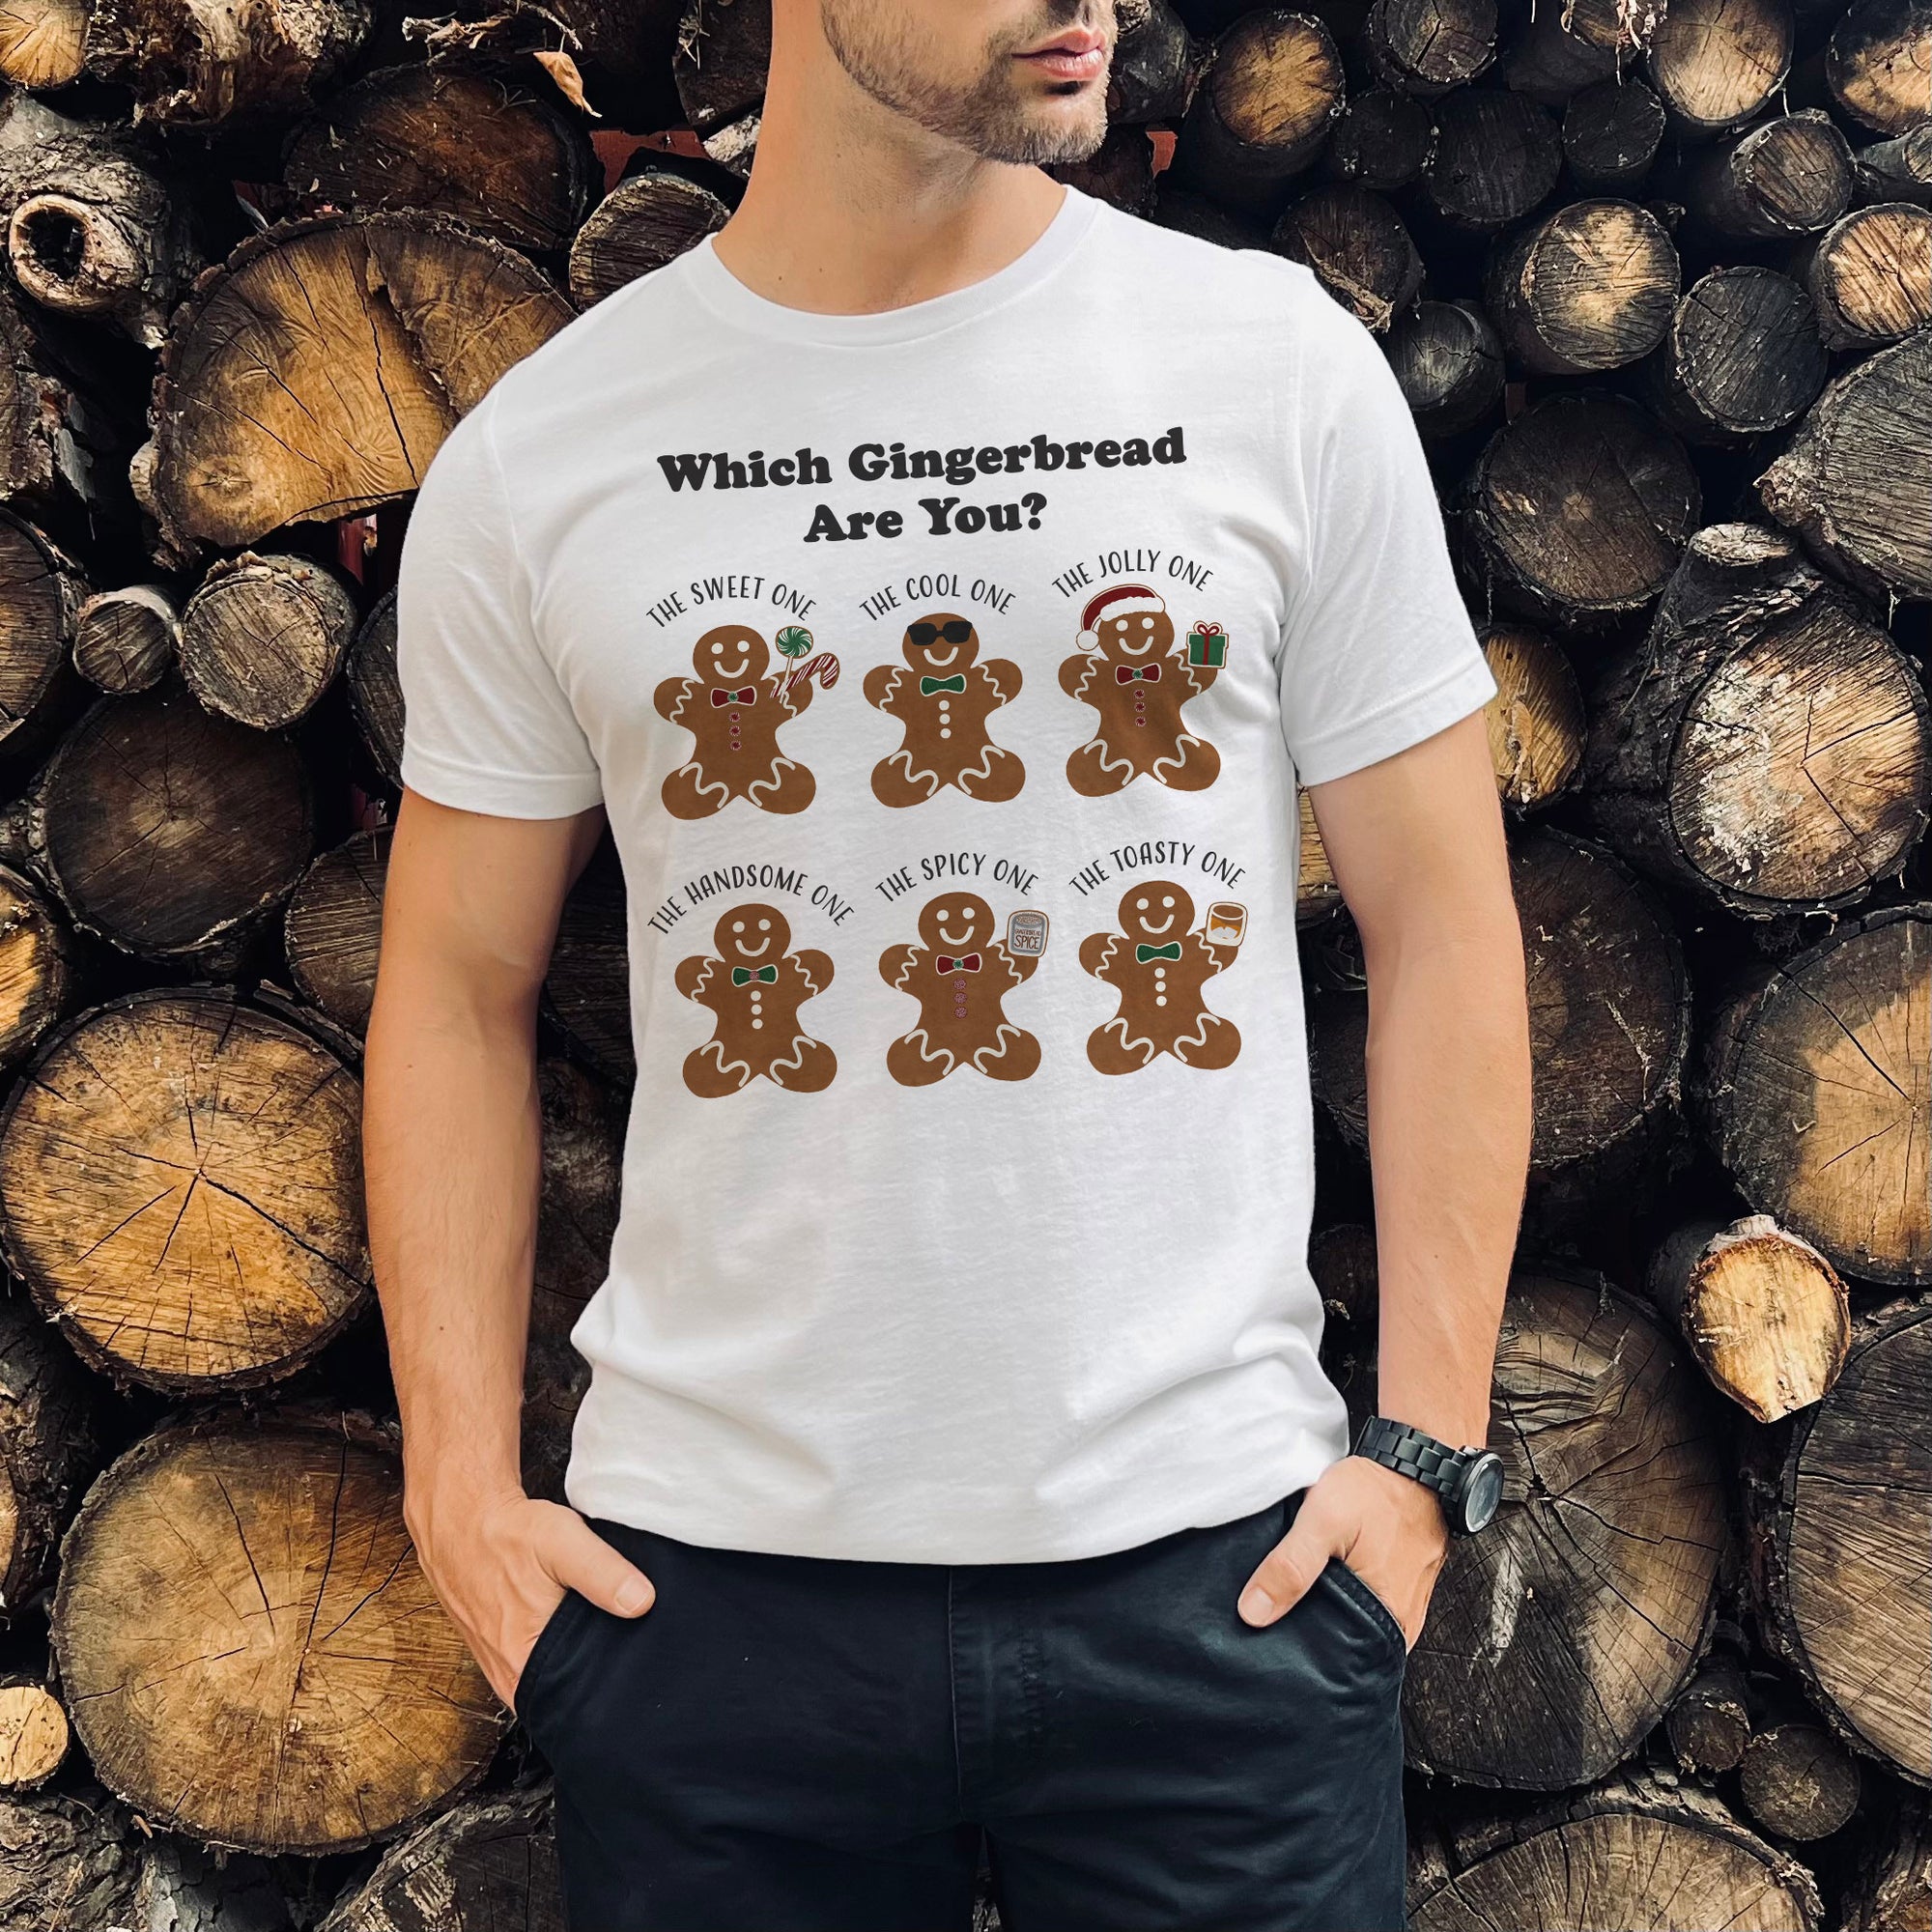 Which Gingerbread Are You? Gingerbread Man Shirt